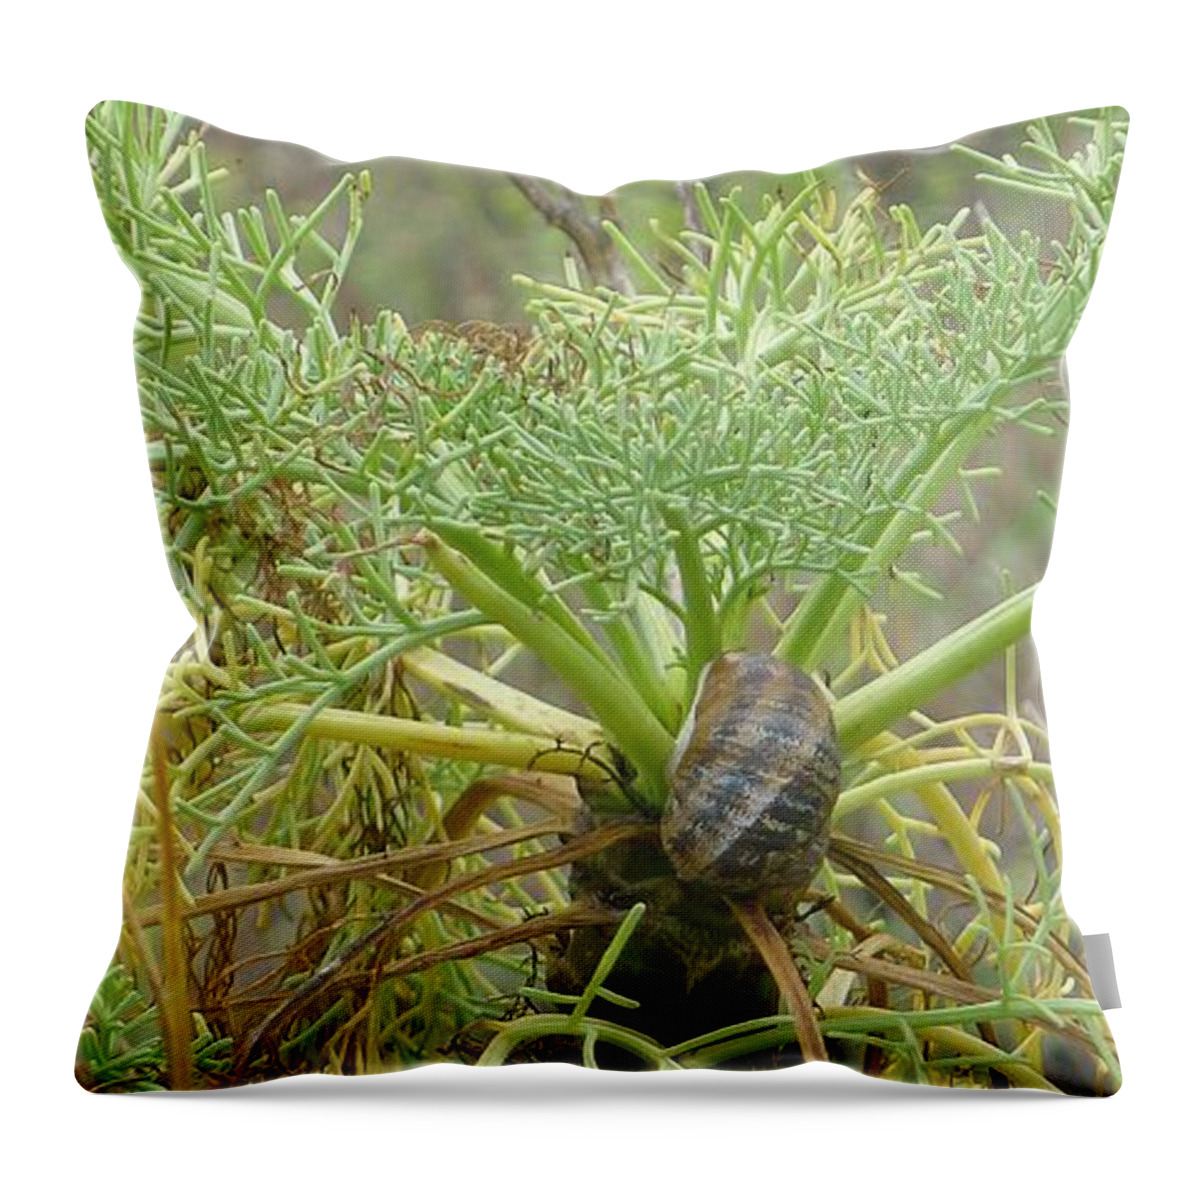  Throw Pillow featuring the photograph Snail Trail by Nora Boghossian